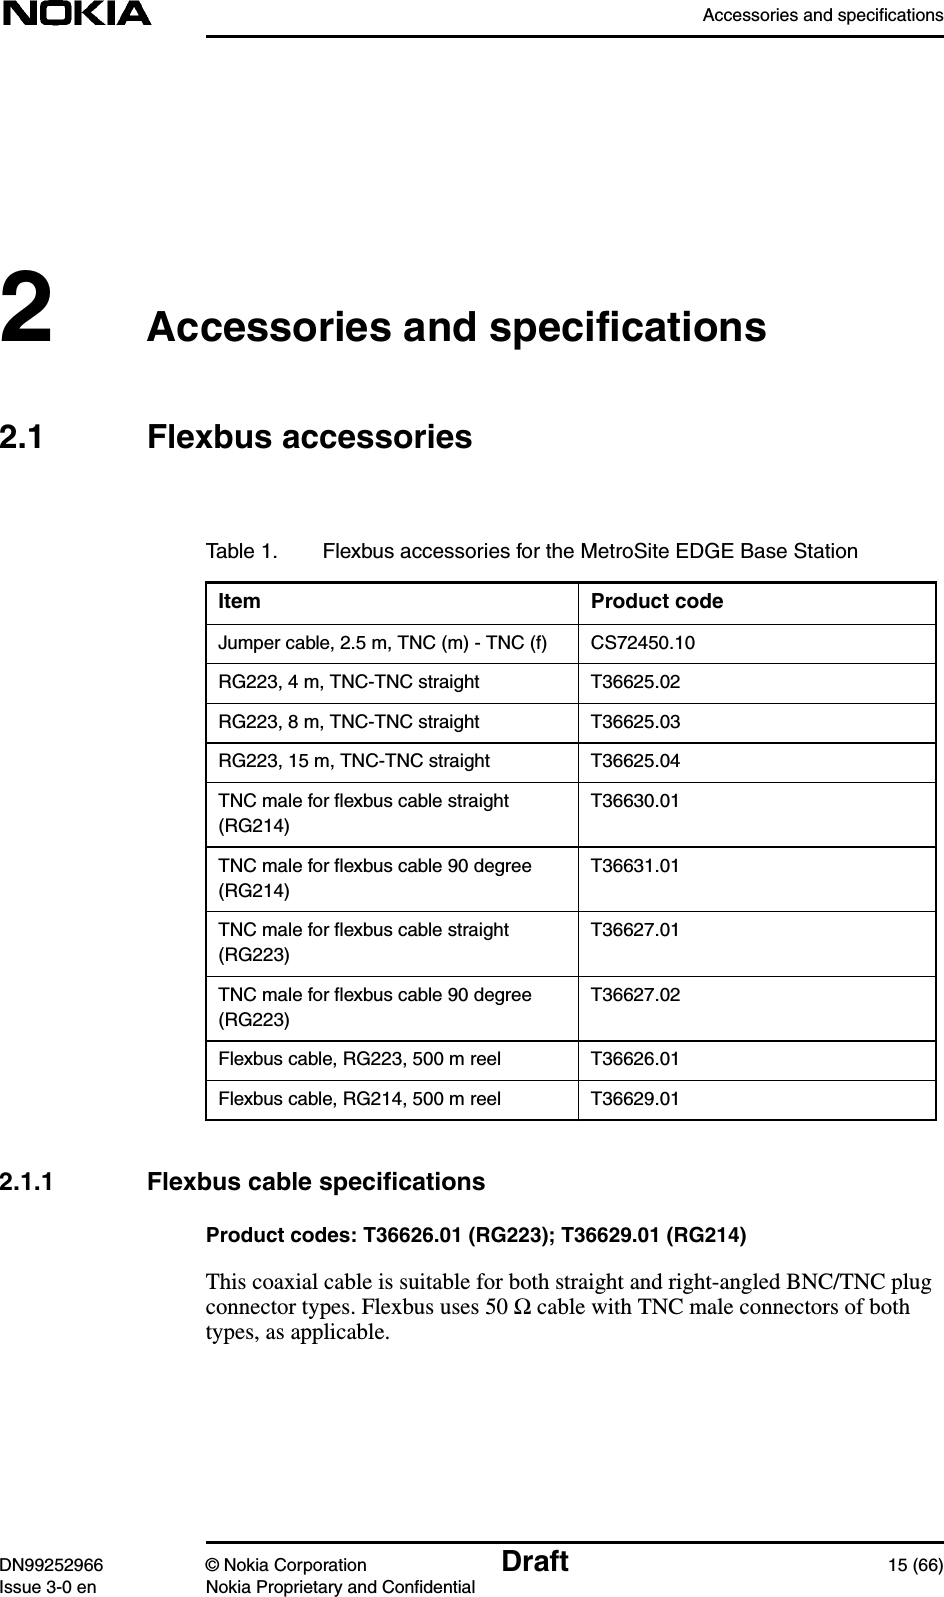 Accessories and specificationsDN99252966 © Nokia Corporation Draft 15 (66)Issue 3-0 en Nokia Proprietary and Confidential2Accessories and specifications2.1 Flexbus accessories2.1.1 Flexbus cable specificationsProduct codes: T36626.01 (RG223); T36629.01 (RG214)This coaxial cable is suitable for both straight and right-angled BNC/TNC plugconnector types. Flexbus uses 50 Ω cable with TNC male connectors of bothtypes, as applicable.Table 1. Flexbus accessories for the MetroSite EDGE Base StationItem Product codeJumper cable, 2.5 m, TNC (m) - TNC (f) CS72450.10RG223, 4 m, TNC-TNC straight T36625.02RG223, 8 m, TNC-TNC straight T36625.03RG223, 15 m, TNC-TNC straight T36625.04TNC male for ﬂexbus cable straight(RG214)T36630.01TNC male for ﬂexbus cable 90 degree(RG214)T36631.01TNC male for ﬂexbus cable straight(RG223)T36627.01TNC male for ﬂexbus cable 90 degree(RG223)T36627.02Flexbus cable, RG223, 500 m reel T36626.01Flexbus cable, RG214, 500 m reel T36629.01